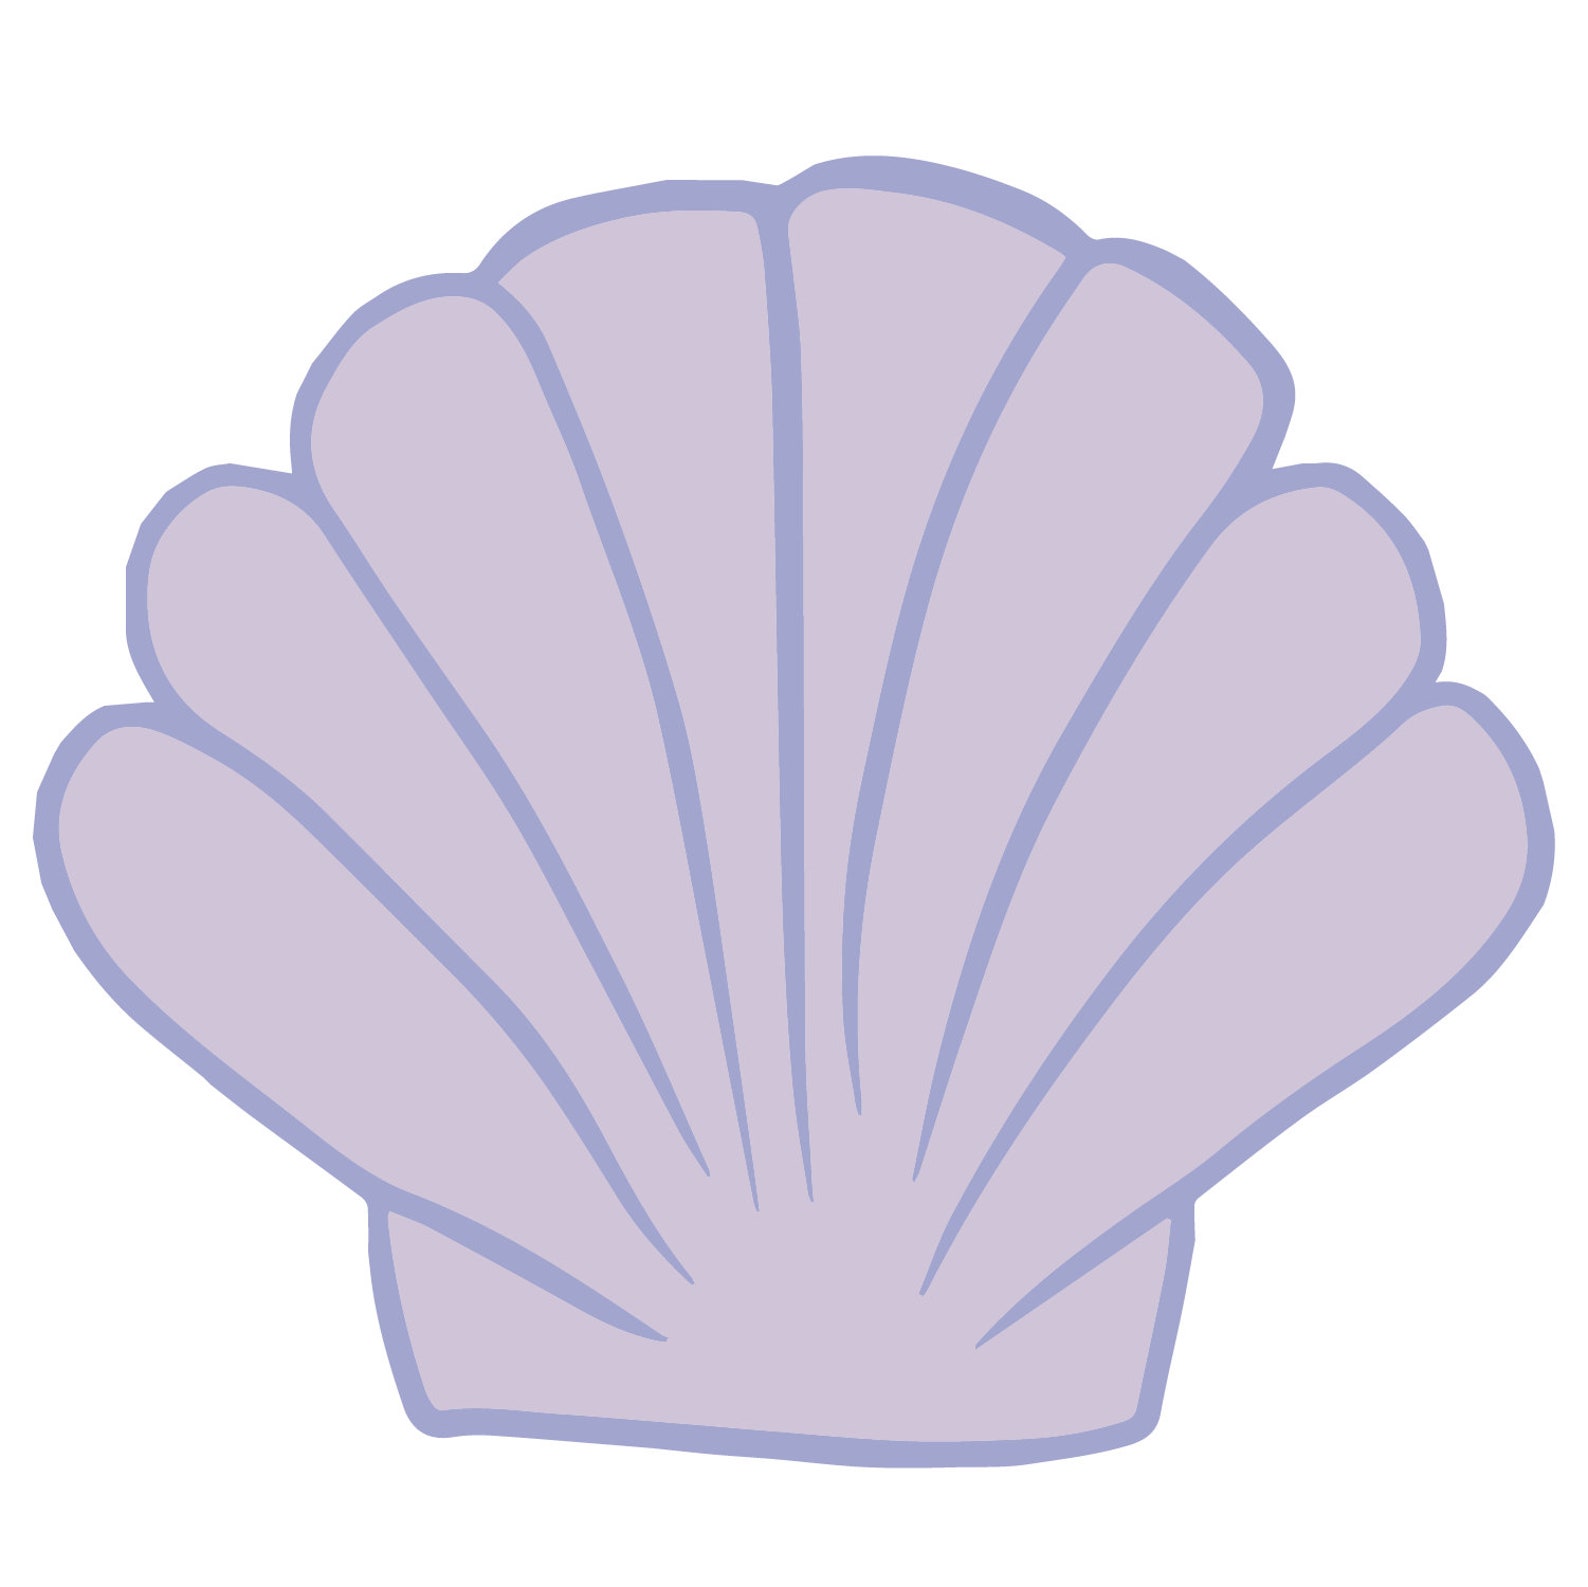 Shell Decals - Etsy